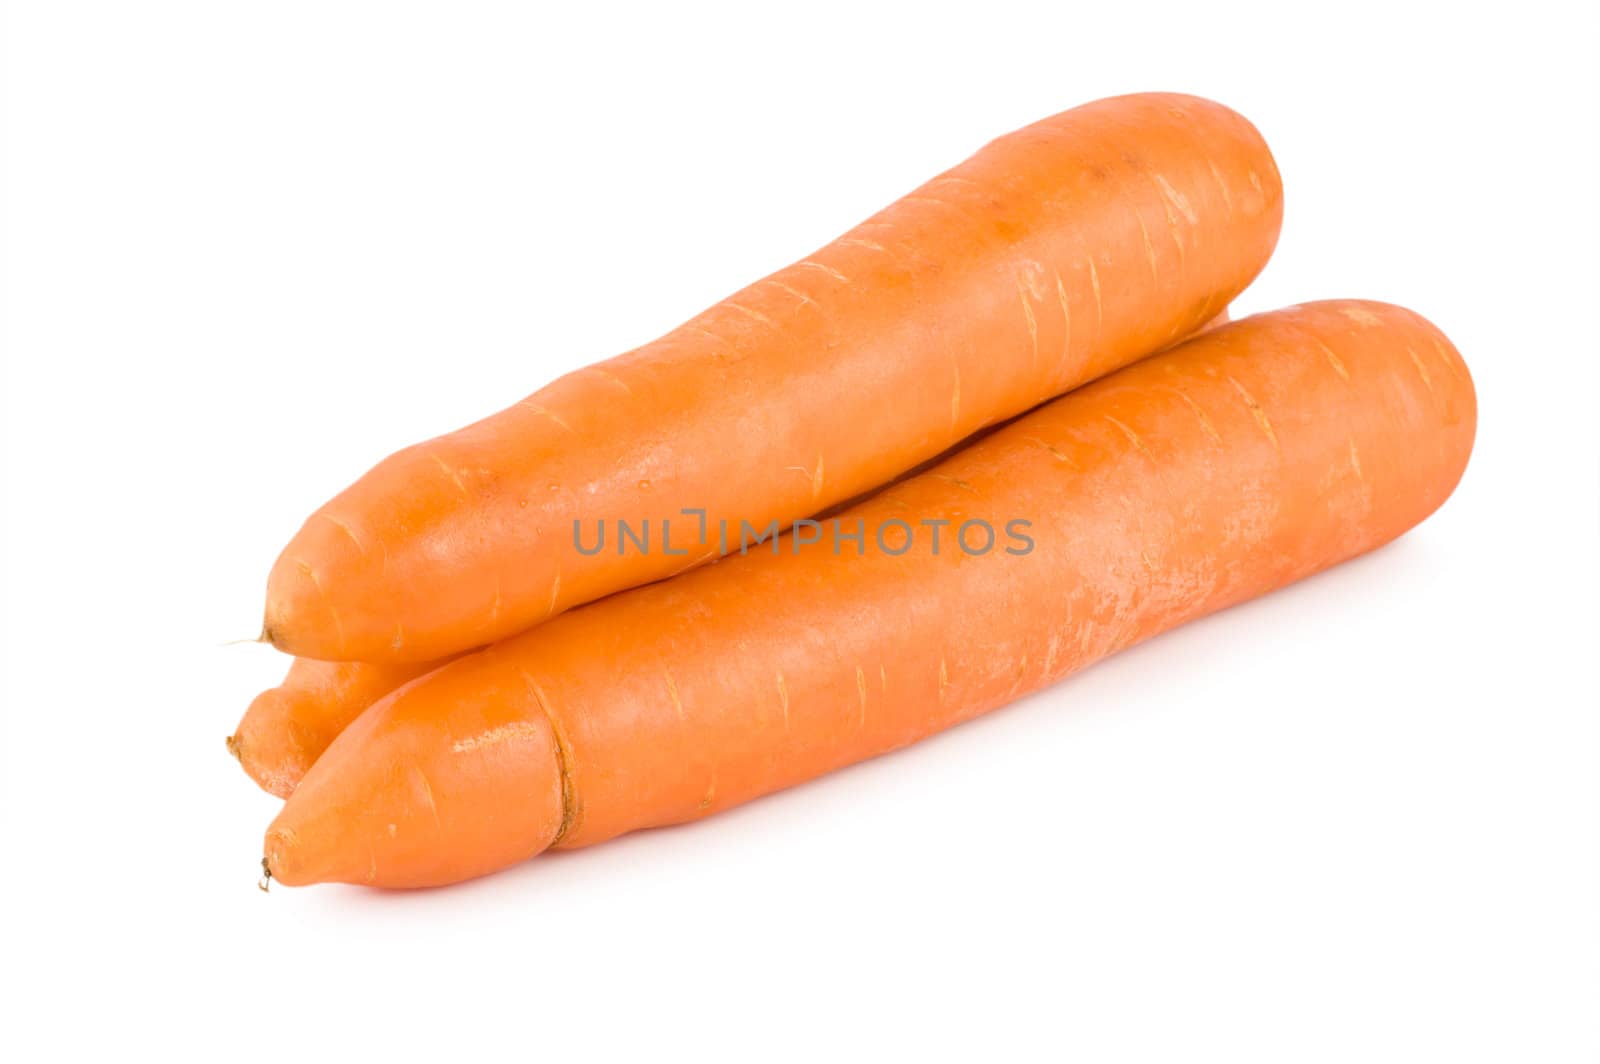 Fresh Carrots Isolated on a White Background